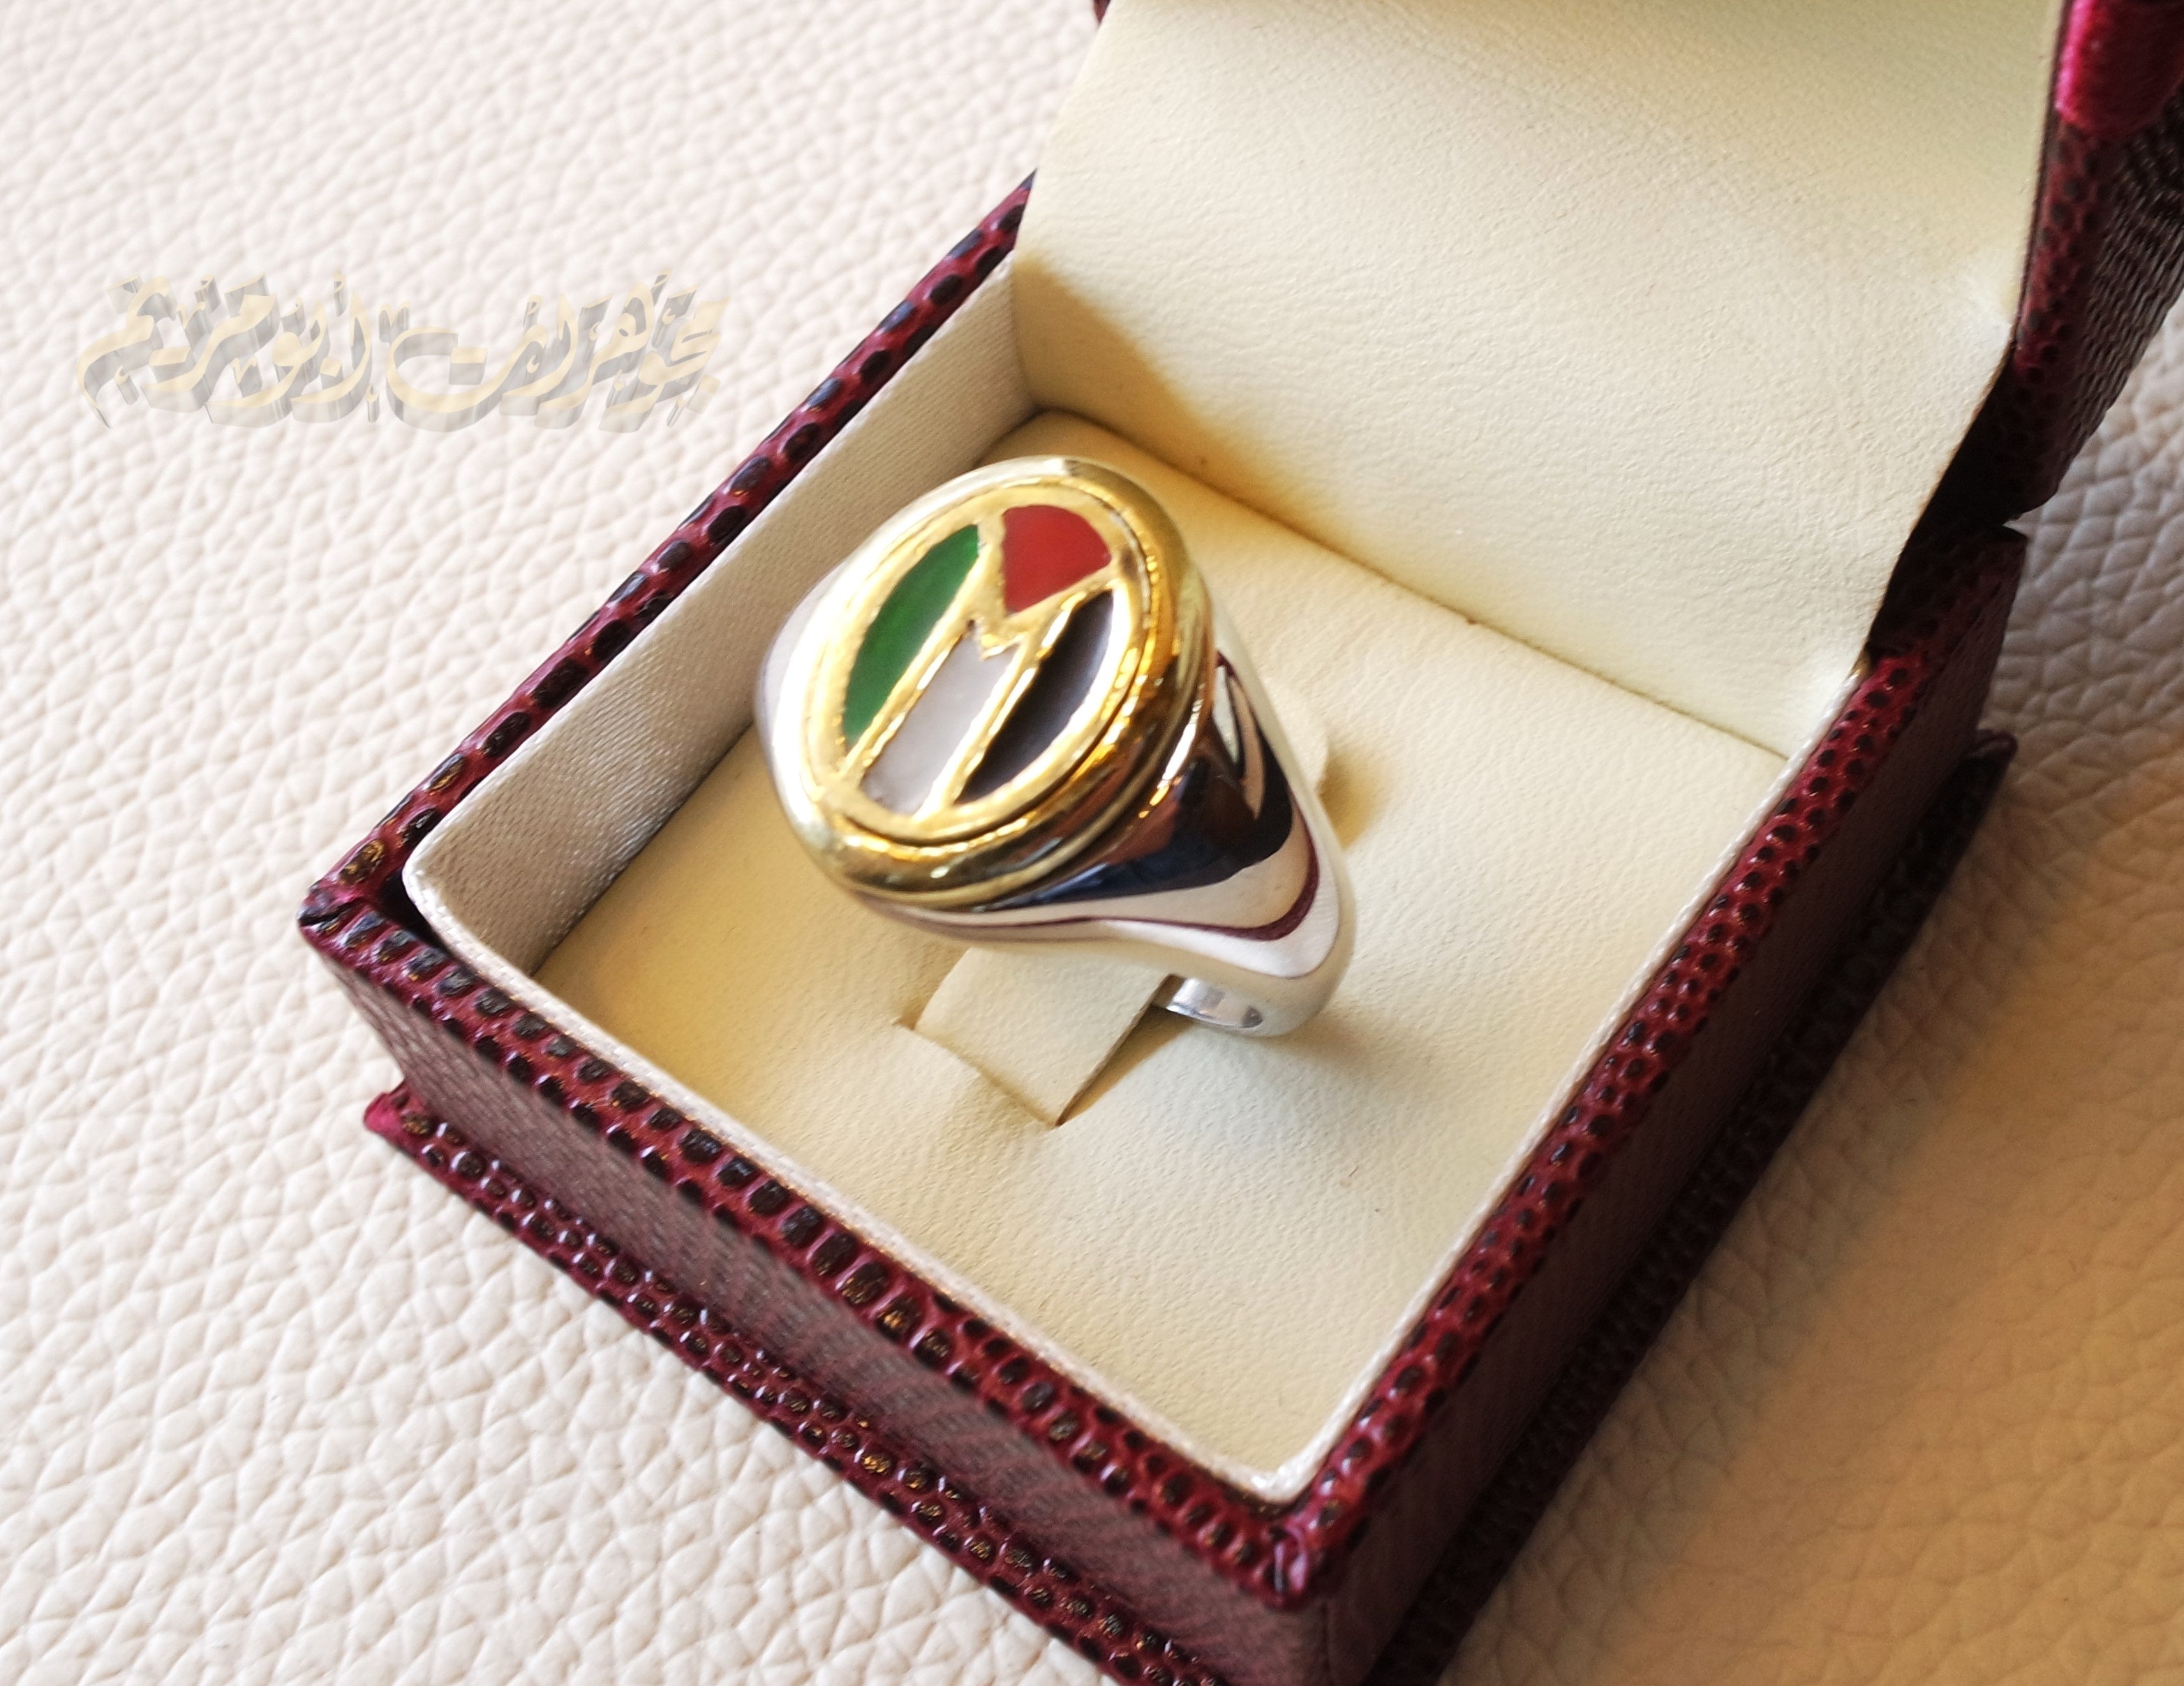 Palestine flag man heavy ring sterling silver and color enamel Arabic bronze frame and ring face style fast shipping all sizes